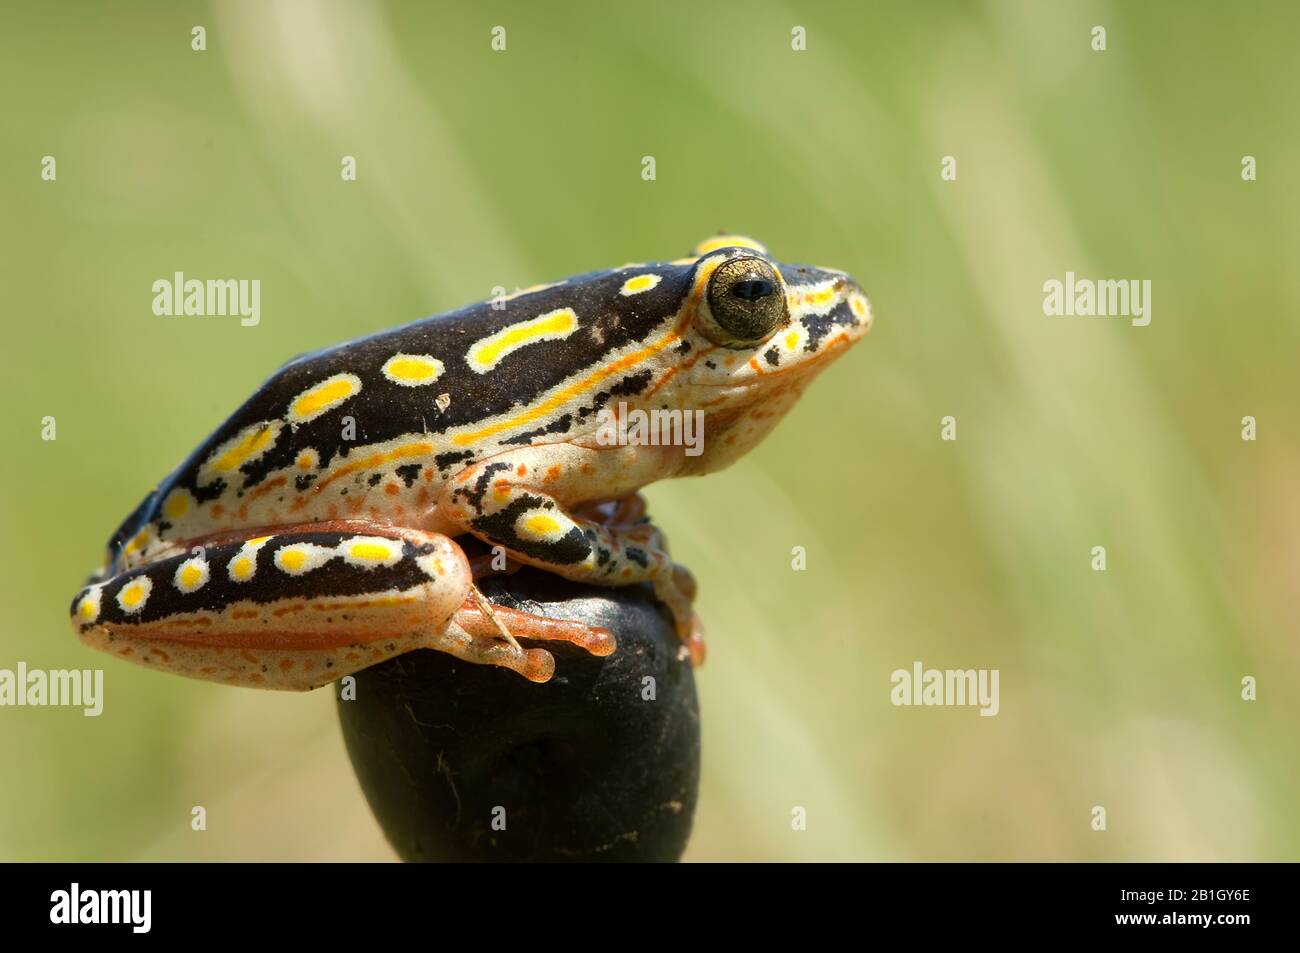 Painted Reed Frog (Hyperolius marmoratus), full-length portrait, side view, South Africa Stock Photo